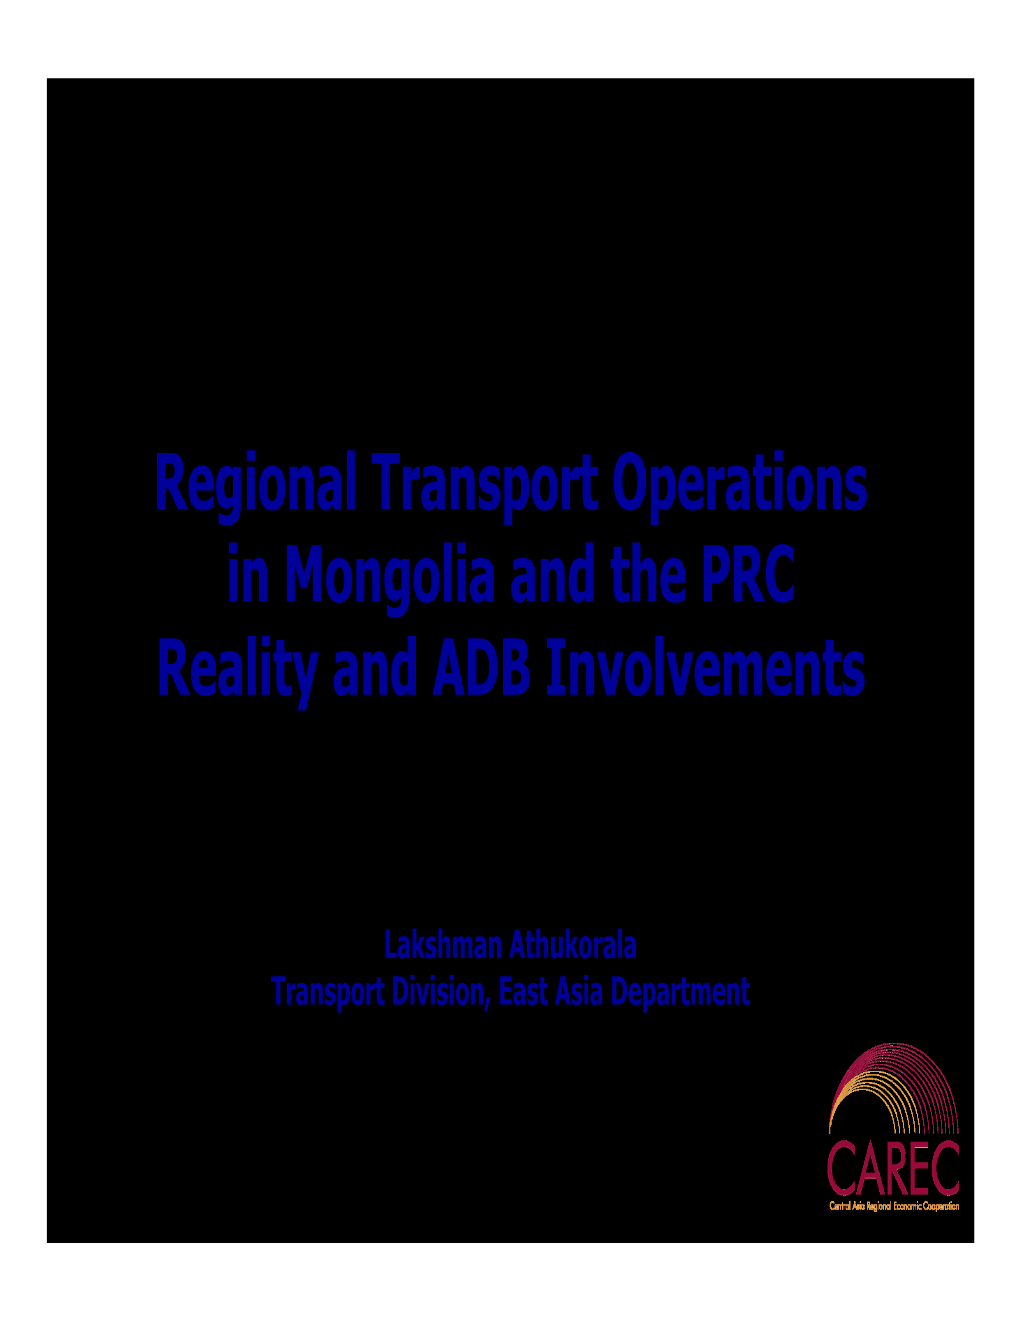 Regional Transport Operations in Mongolia and the PRC Reality and ADB Involvements